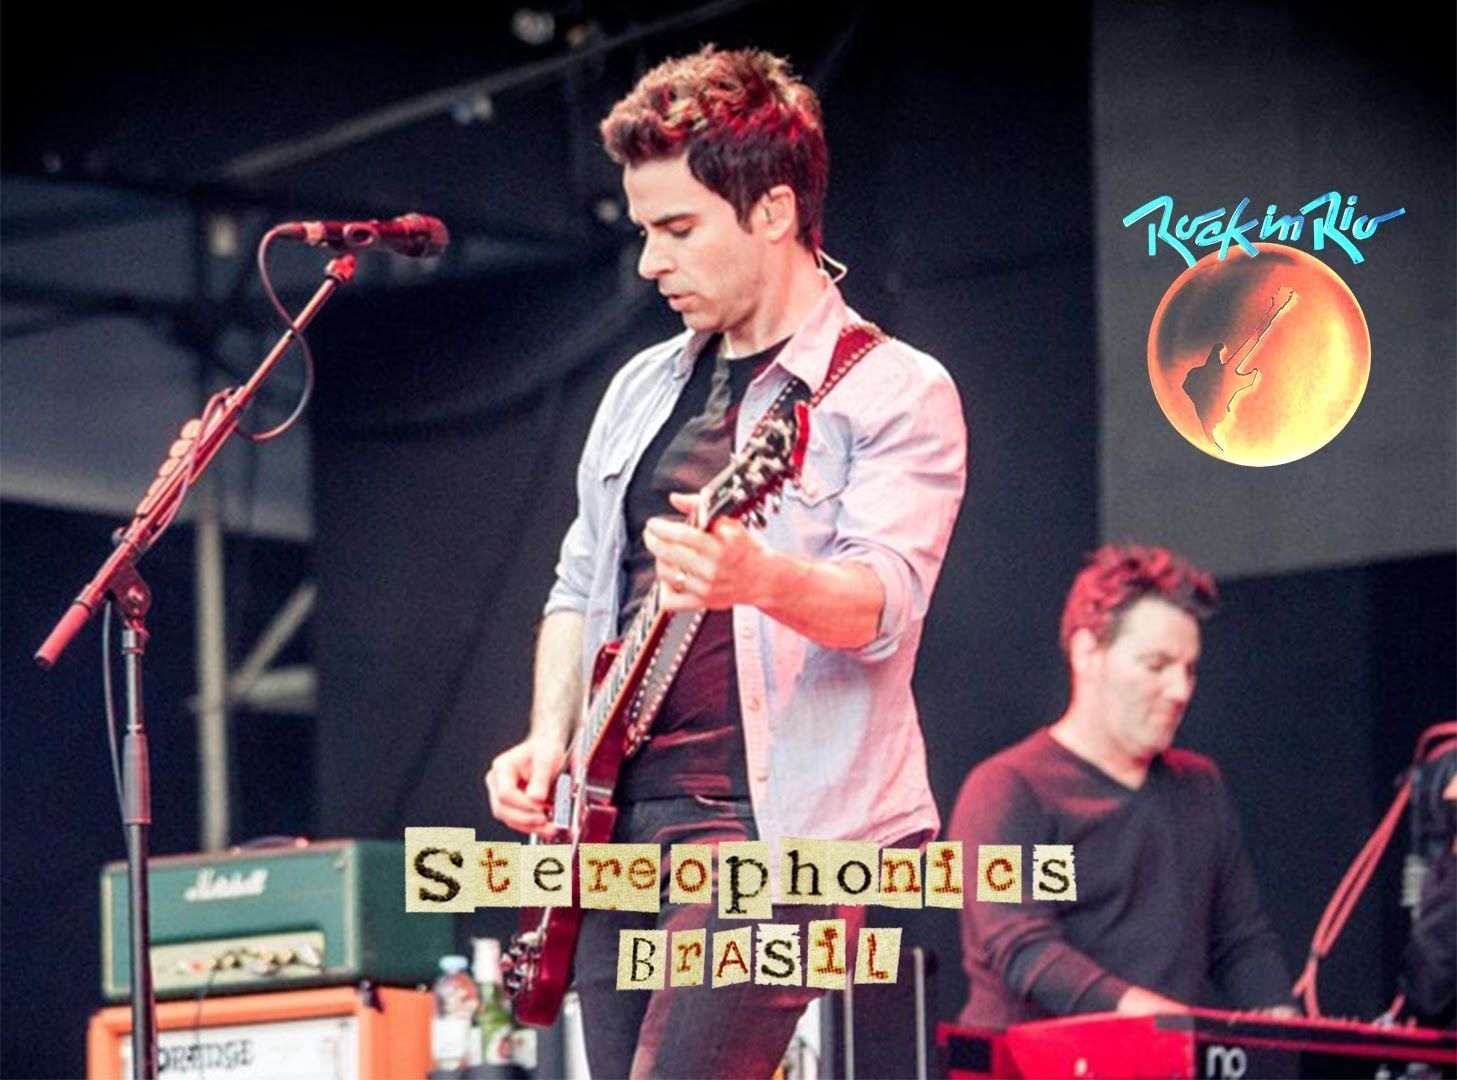 Stereophonics - Live at Rock in Rio Lisbon (2016) - Full Concert